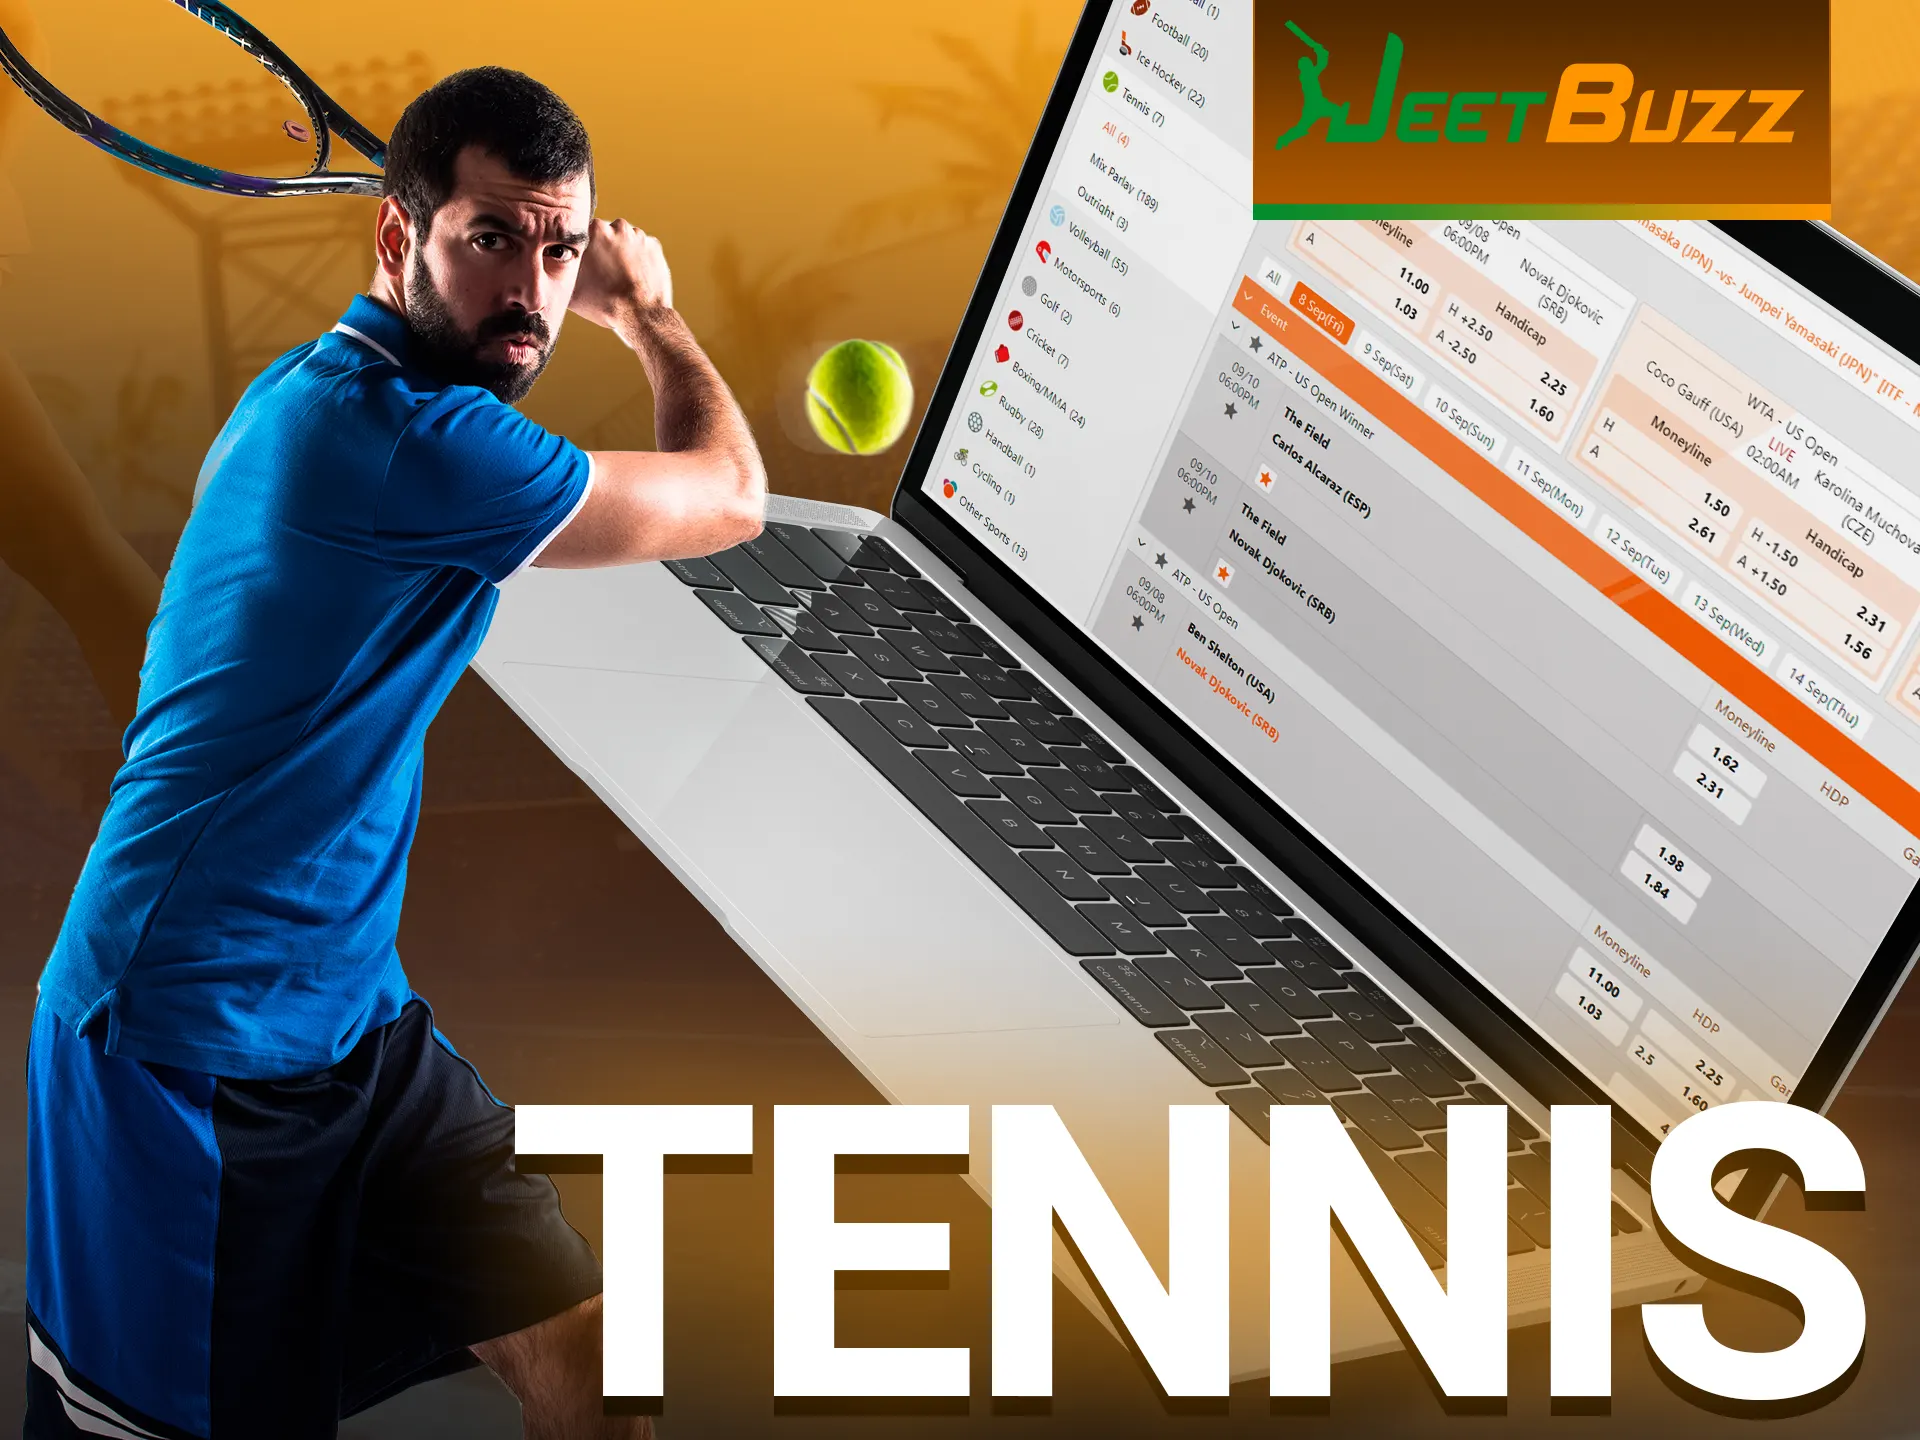 Bet on tennis tournaments with Jeetbuzz.